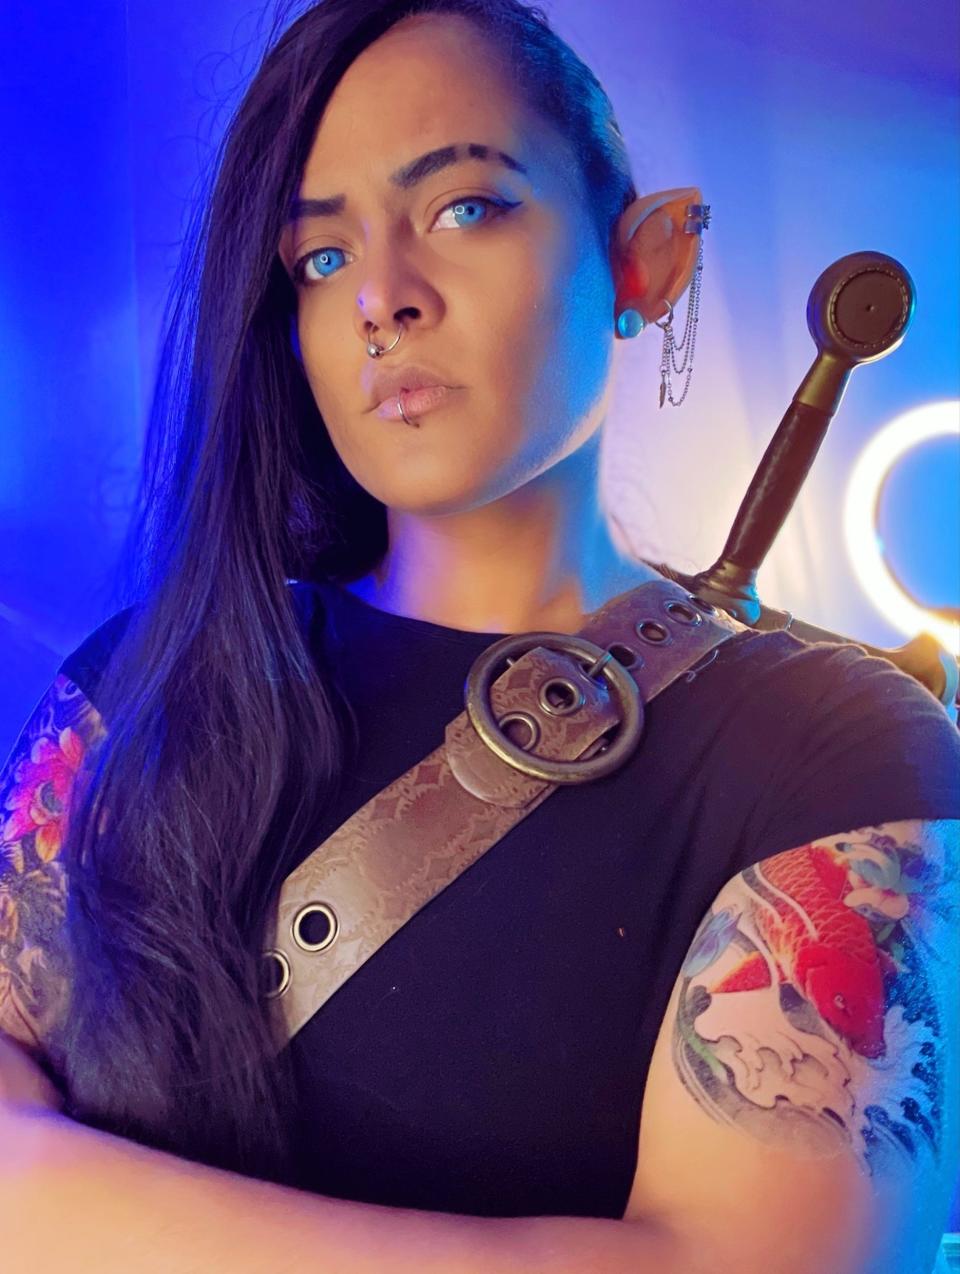 A person with long, black hair and blue eyes poses with a sword.